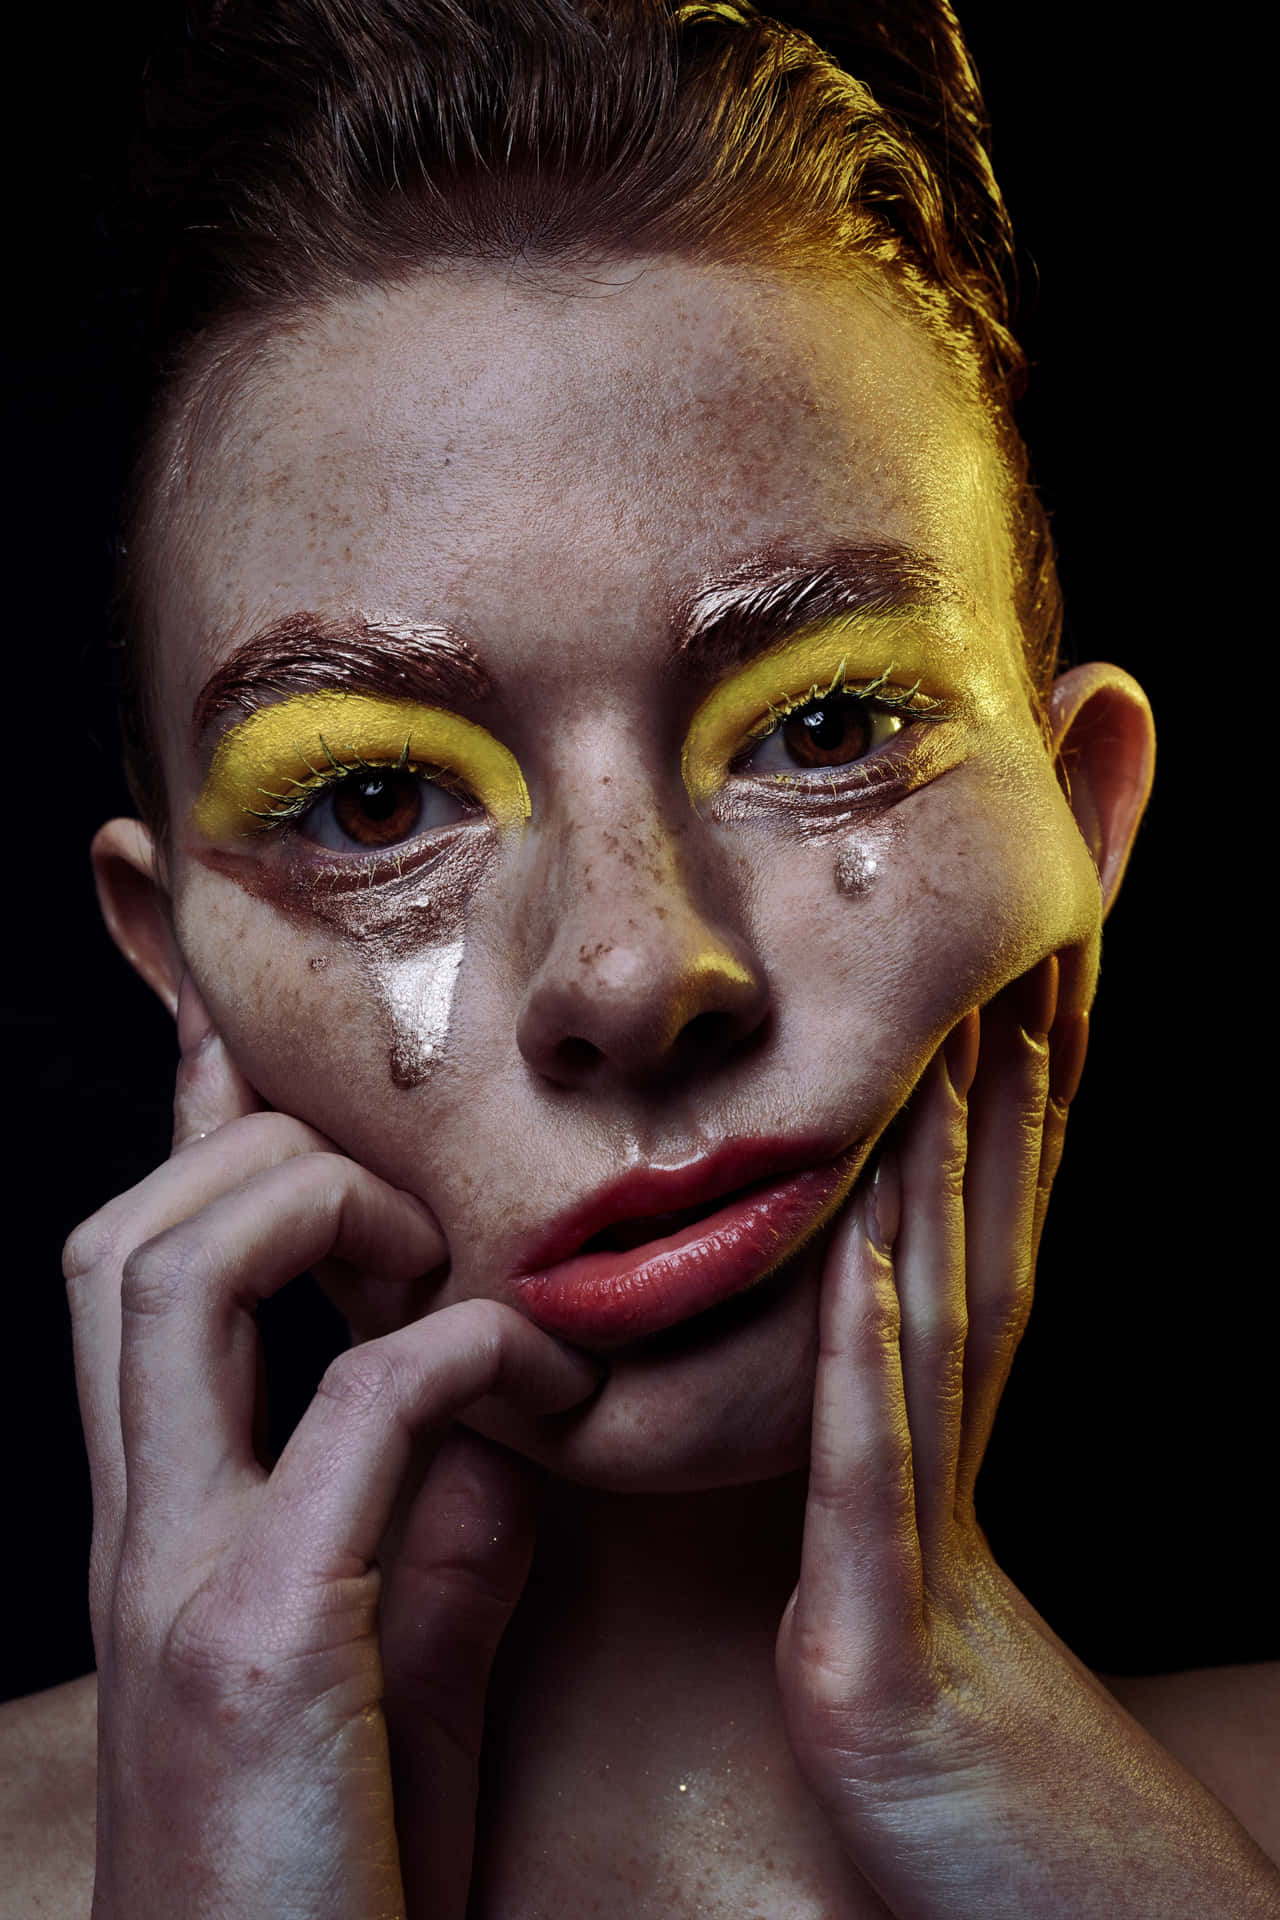 A Woman With Yellow Makeup And A Face Covered In Tears Background